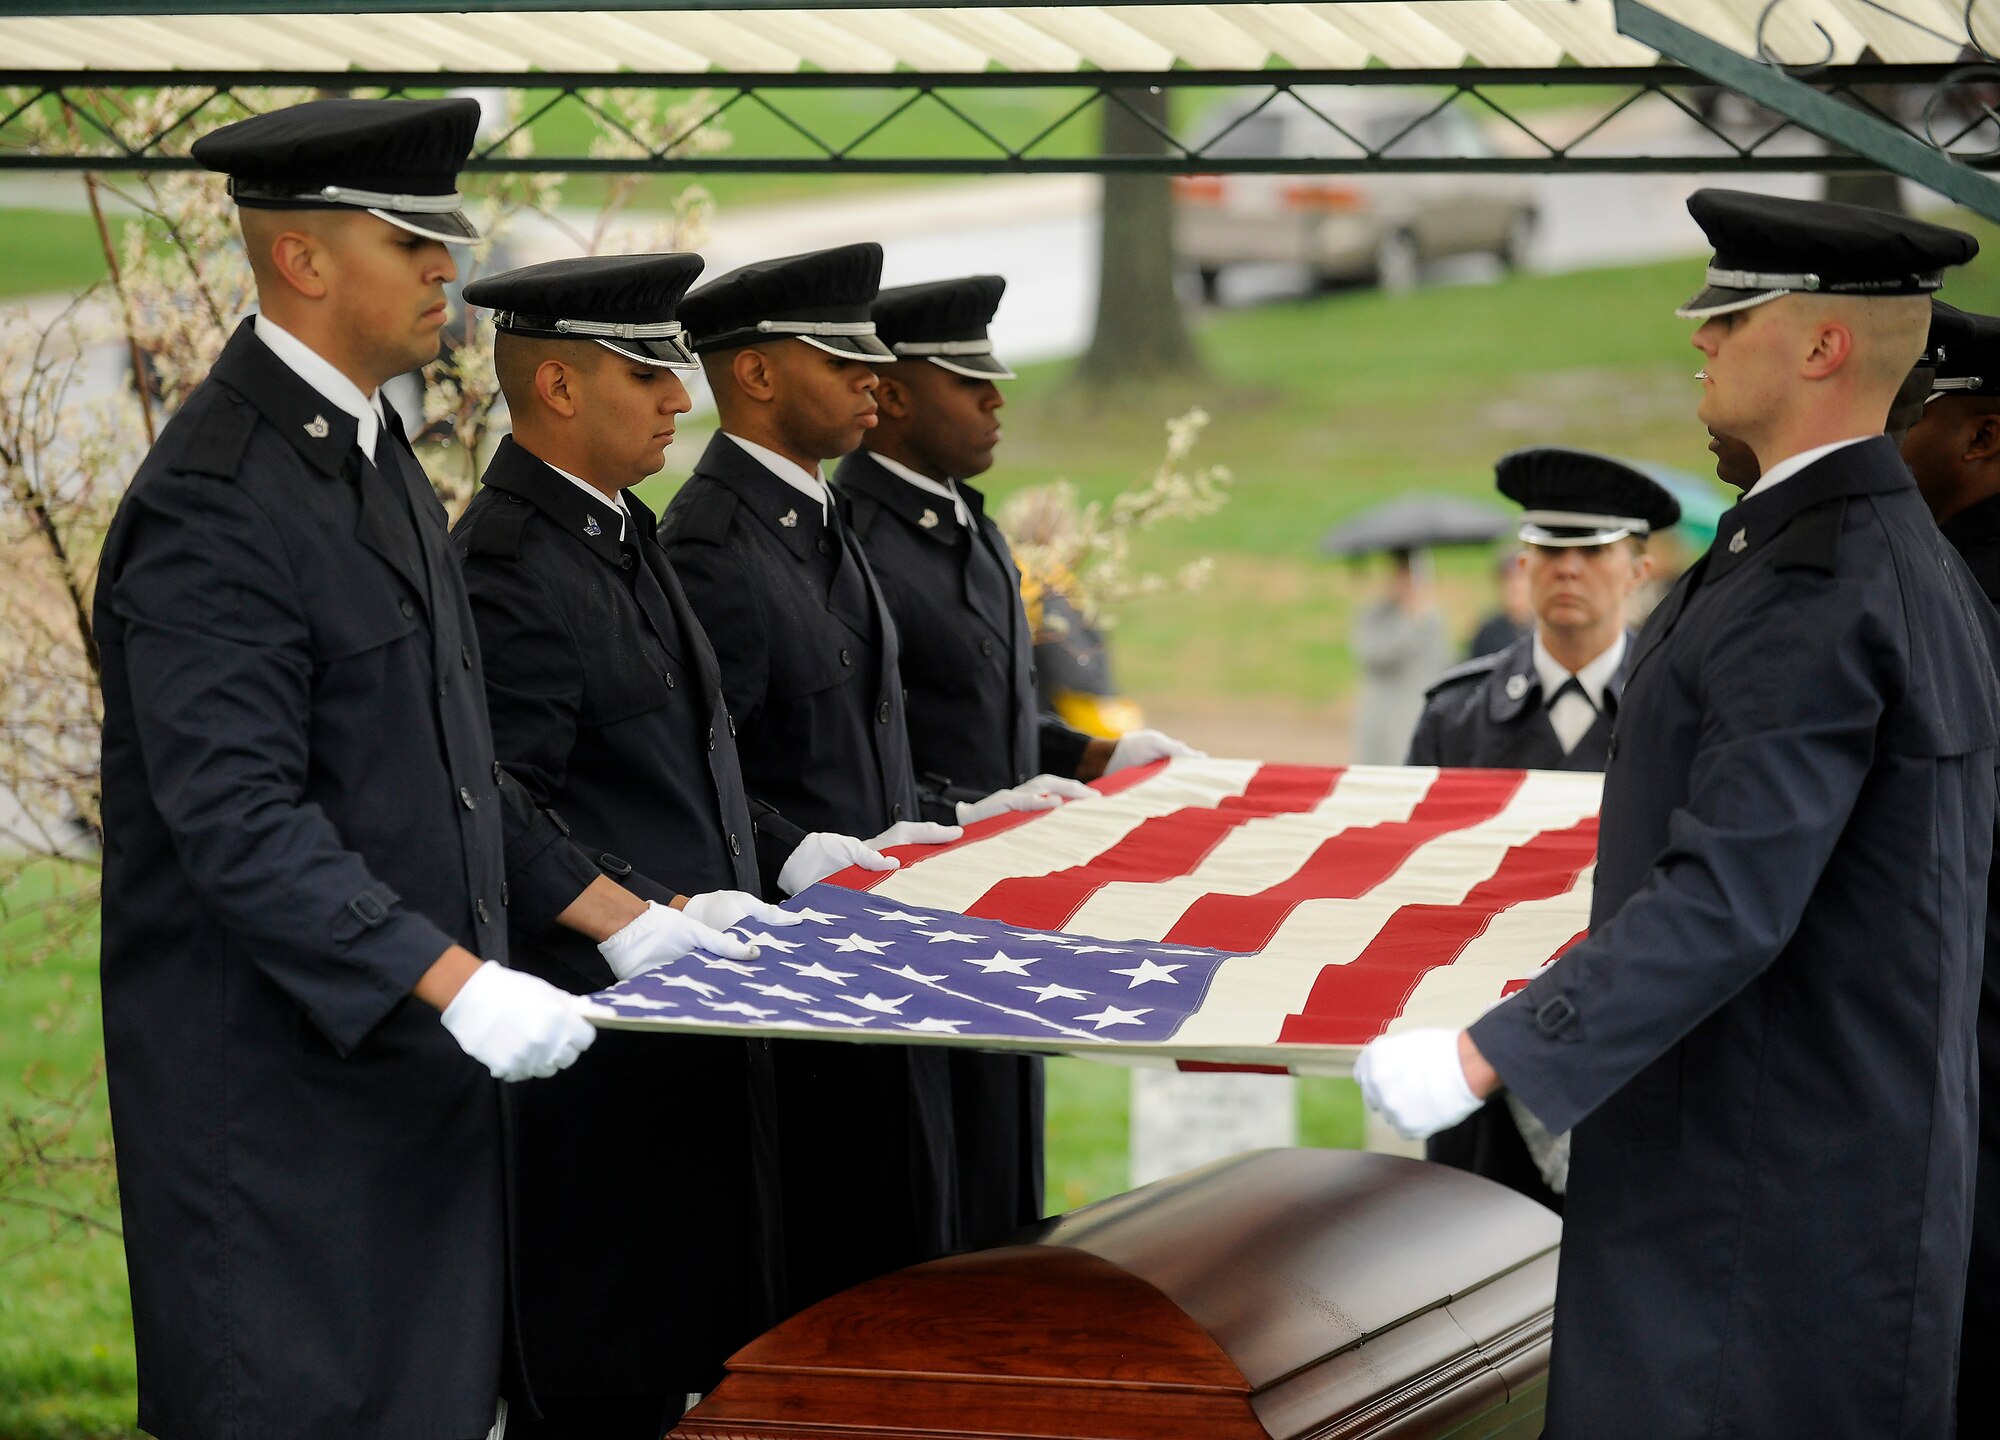 U.S. Air Force Honor Guard flag detail members prepare the U.S. flag March 29, 2010, that covered the casket of Maj. Gen. Jeanne M. Holm during her burial ceremony in Arlington National Cemetery. She was promoted to major general with an effective date of July 1, 1970, and was the first woman in the Armed Forces to serve in that grade. (U.S. Air Force photo/Scott M. Ash)